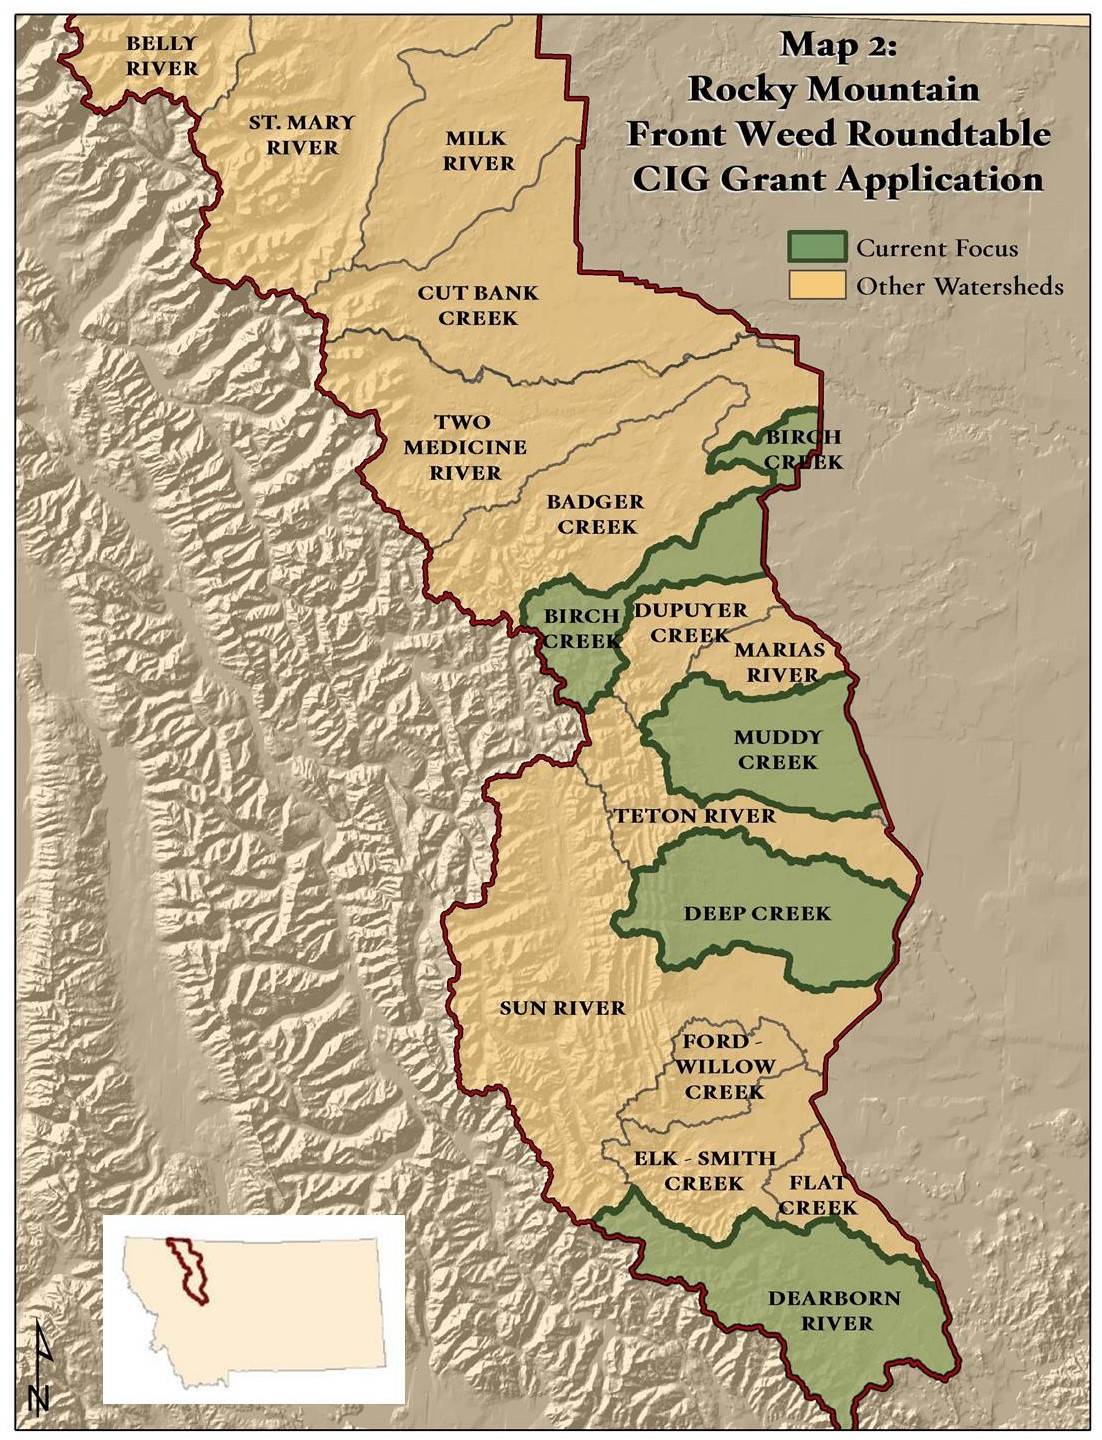 Map of Rocky Mountain Front Weed Roundtable CIG Grant Application